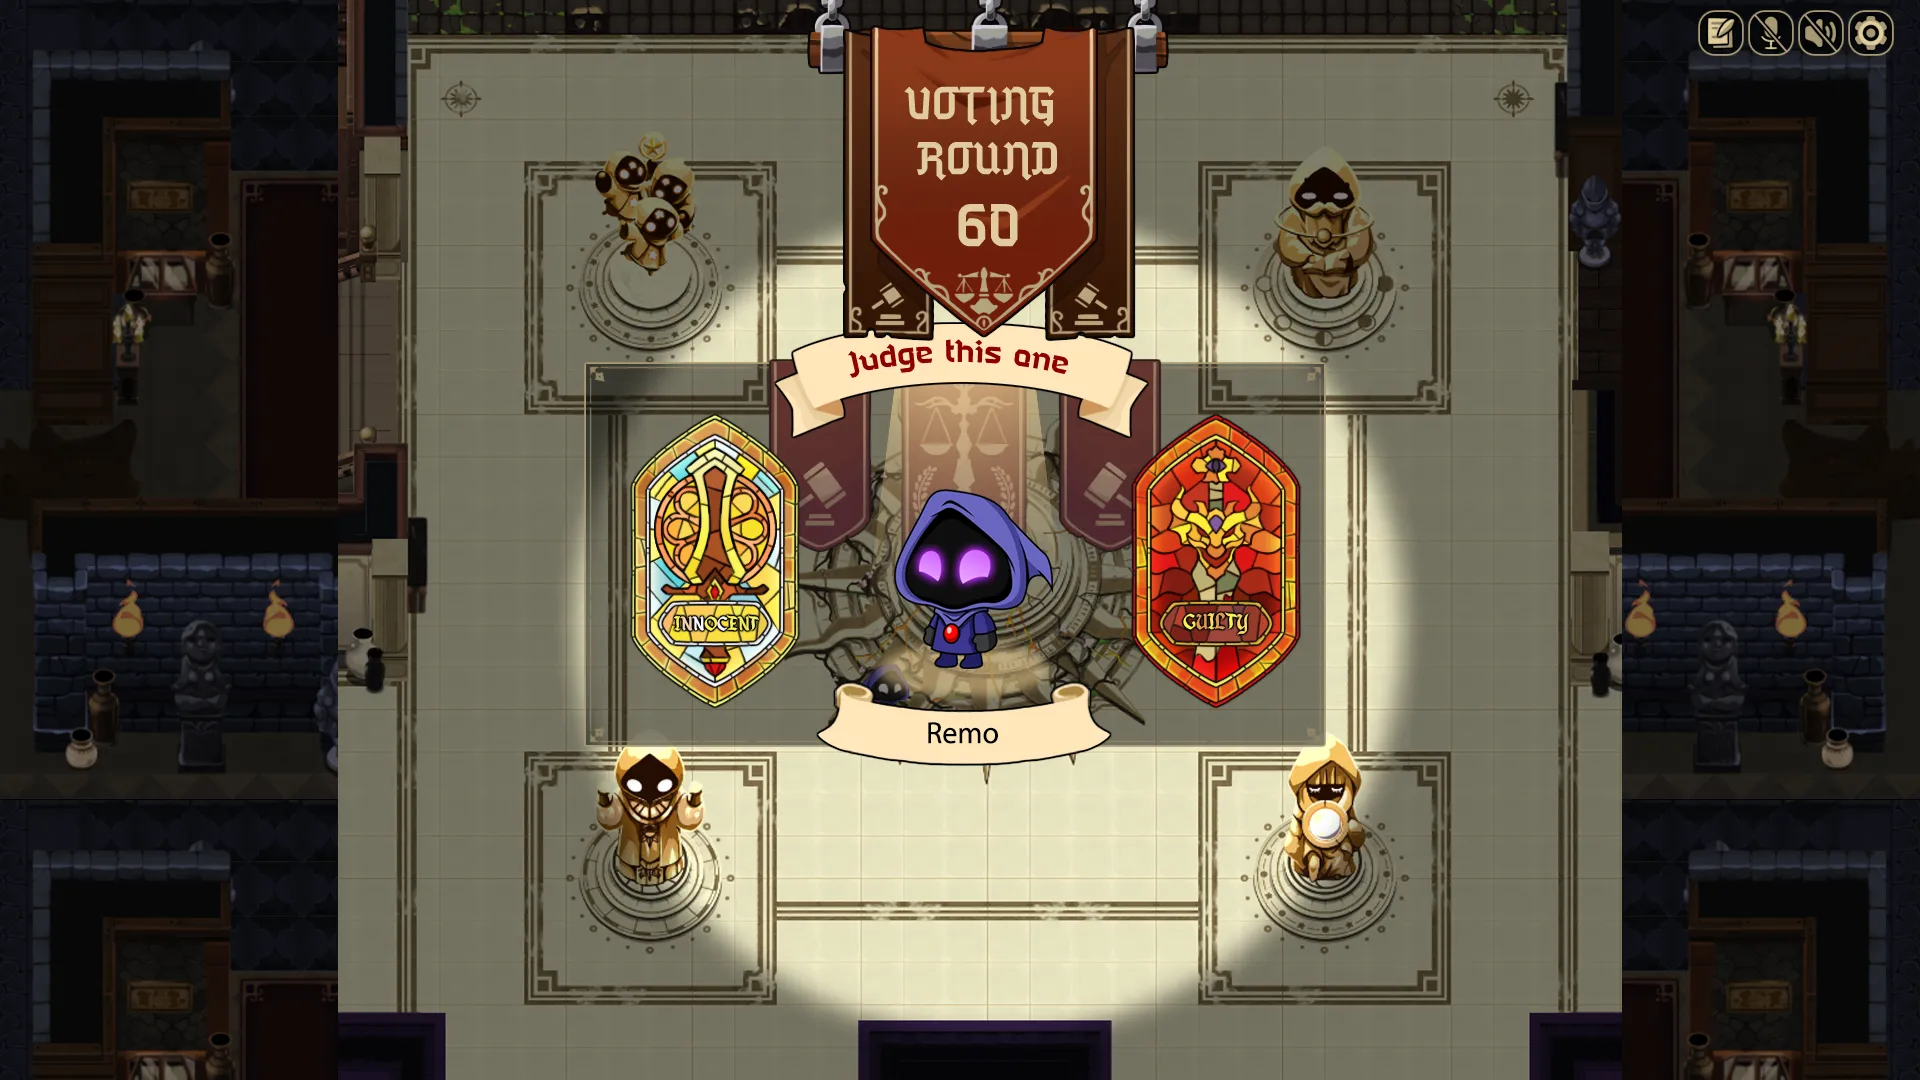 The Voting round in Castle of Blackwater is where players are required to vote on the innocence or guilt of a player, determining their fate in the game.